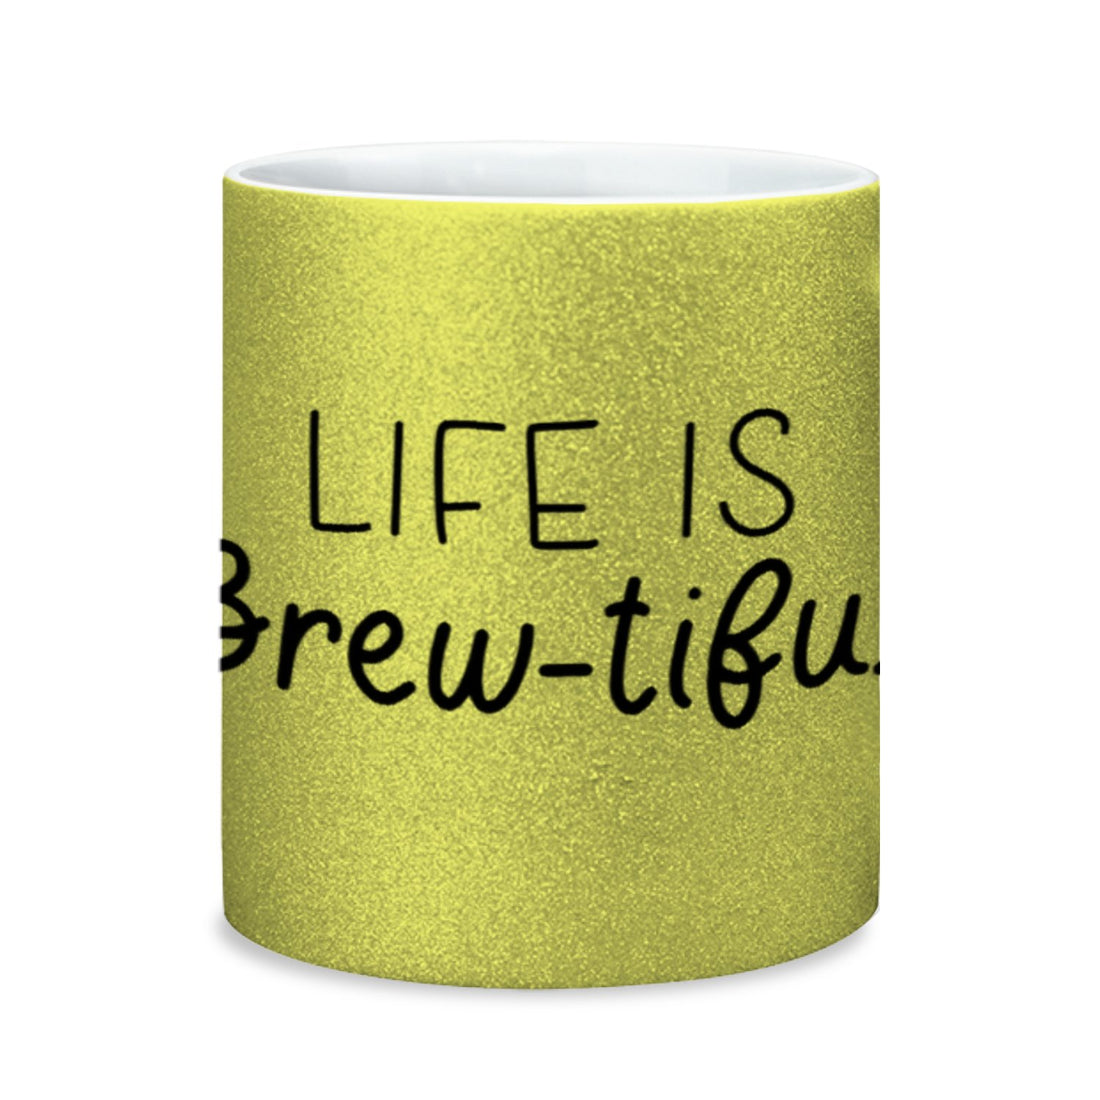 Life is Brew-tiful - Positively Sassy - Life is Brew-tiful